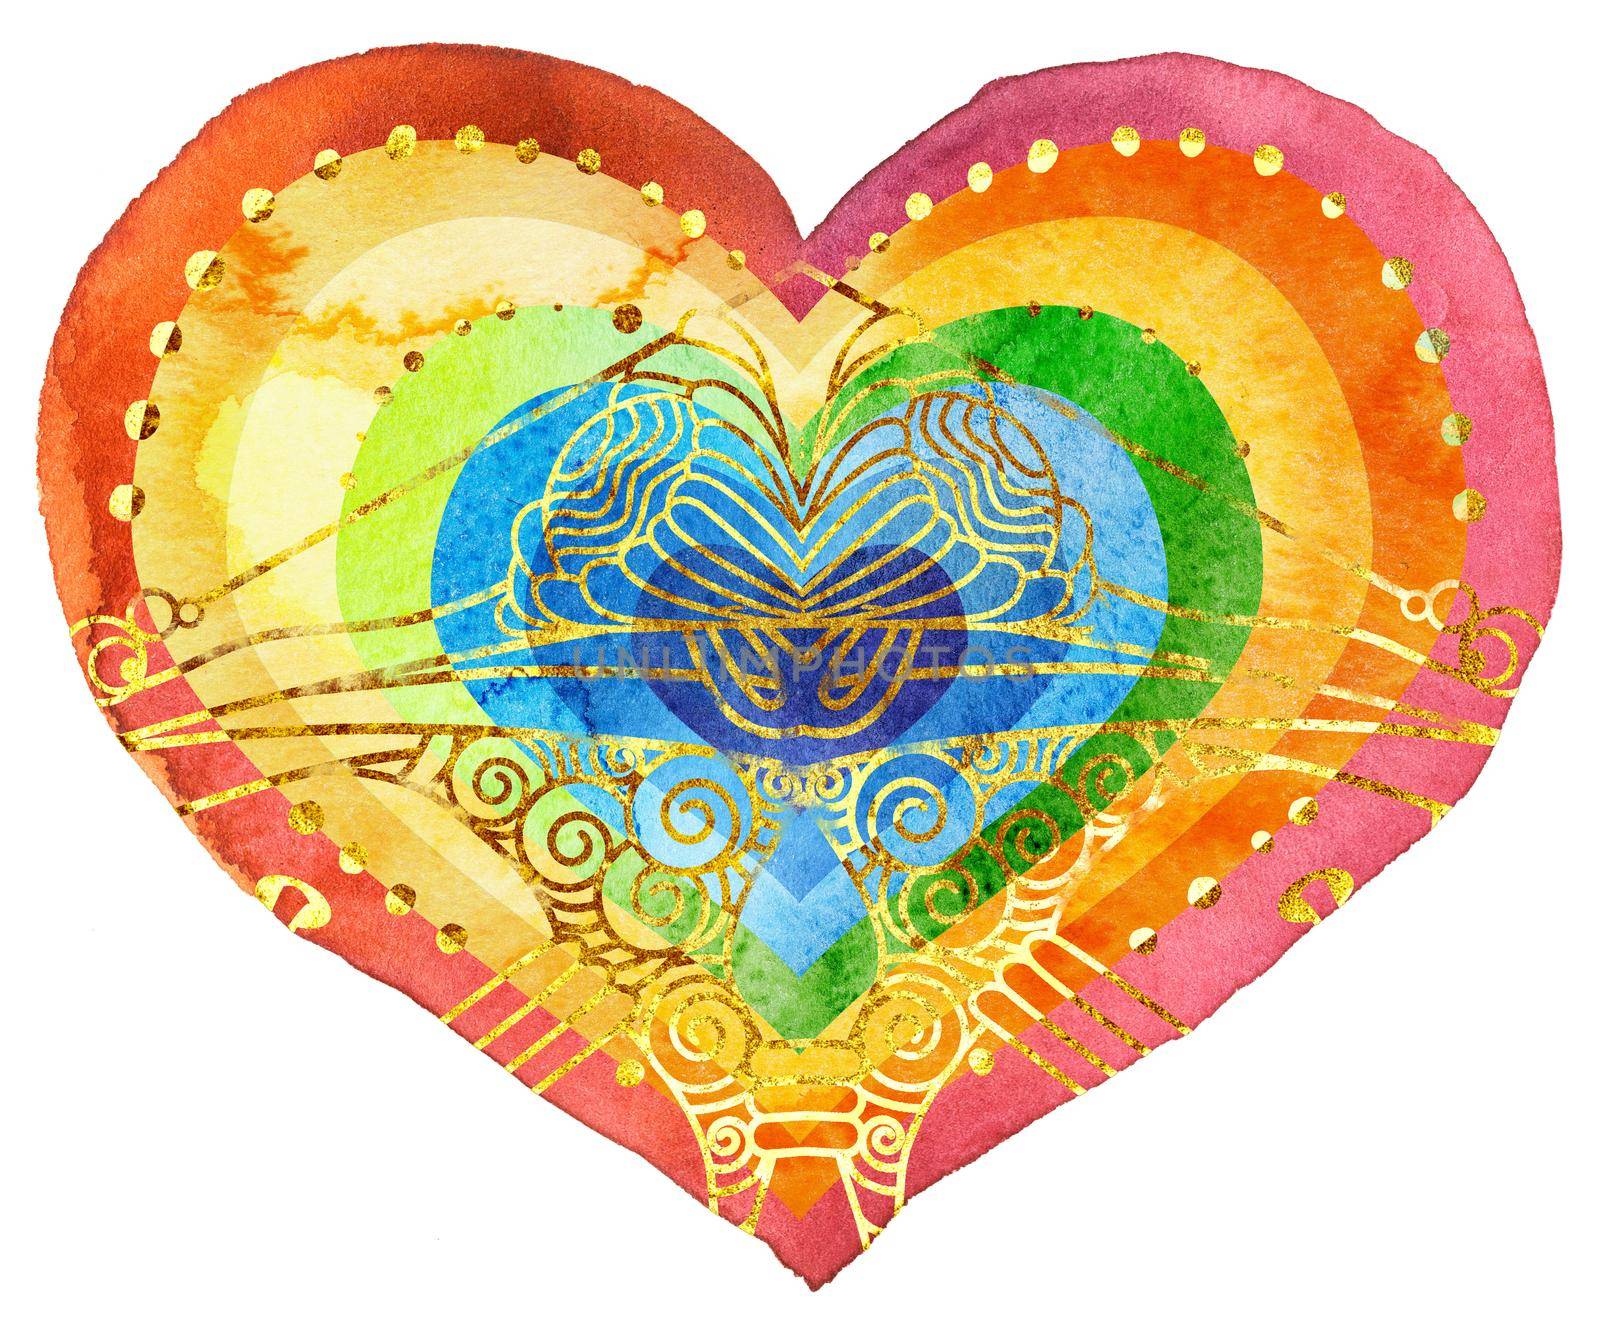 Watercolor textured rainbow heart with gold pattern by NataOmsk